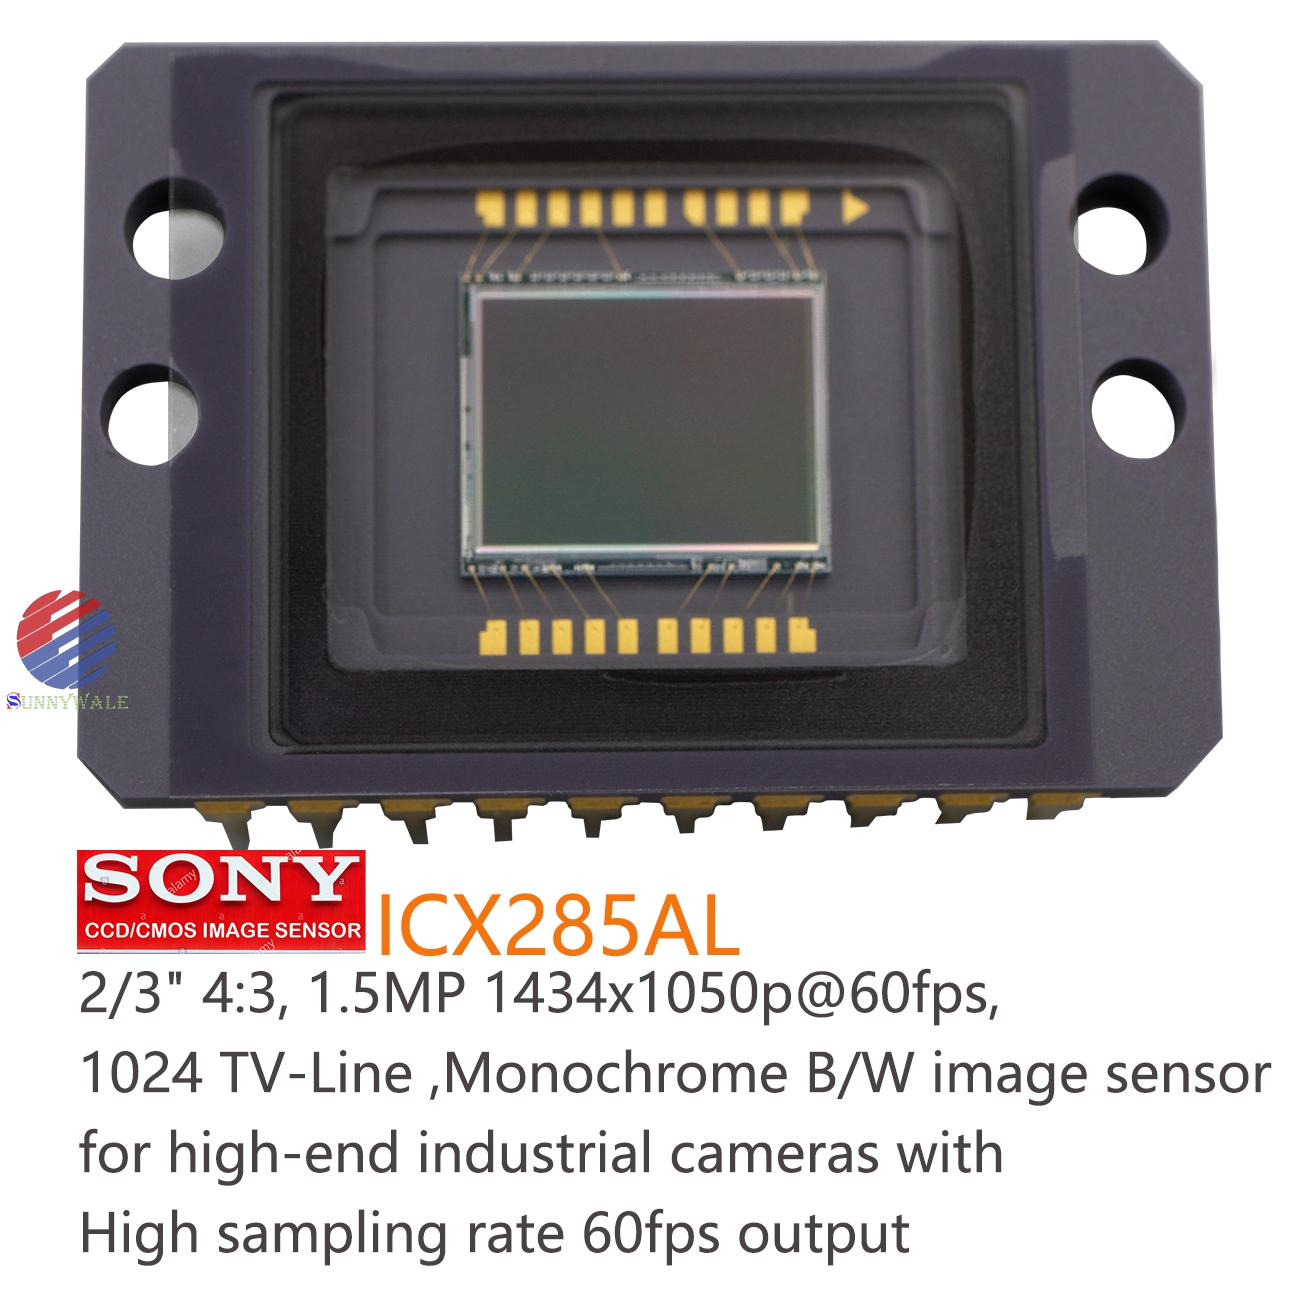 ICX285AL, SONY 2/3 CCD, SONY 4:3 sensor, Industrial camera CCD, High Speed Camera sensor, Industrial camera CCD, high frame rate CCD, high sampling rate image sensor, high resolution analog output CCD, 1.5 megapixel CCD, high resolution CCD, high-end industrial camera sensor, Black and white CCD, monochrome CCD, black and white industrial camera CCD, SONY black and white photosensitive chip, large size large pixel CCD